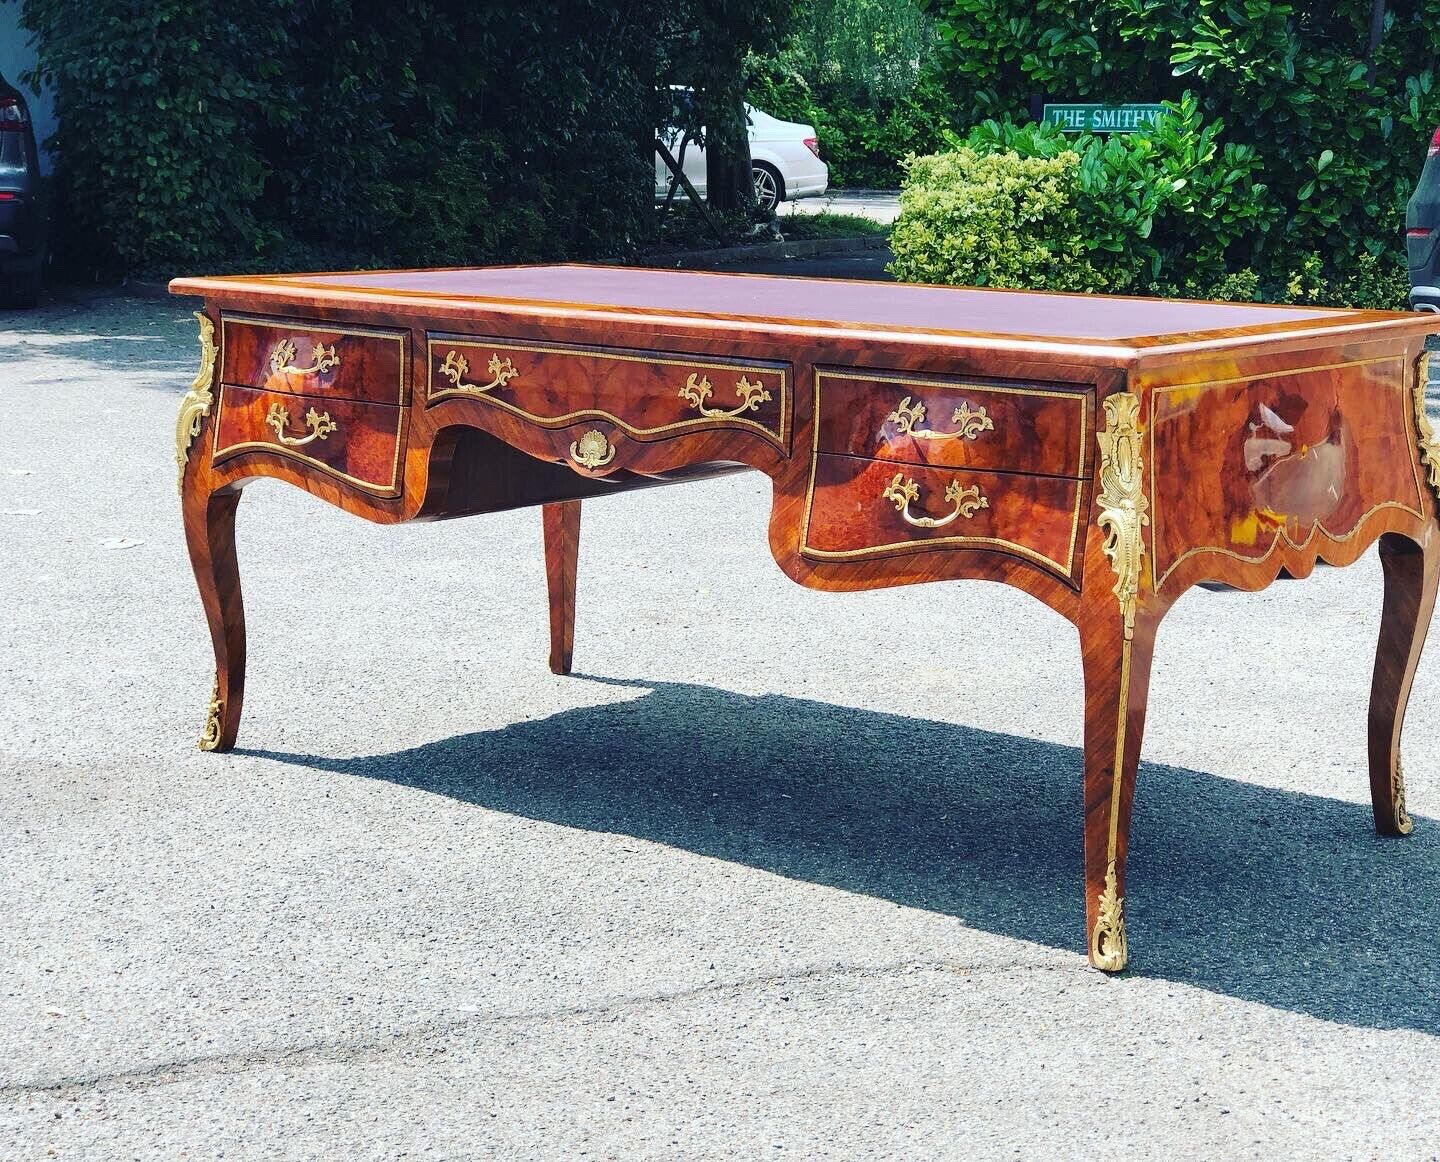 Presidential Desk, Inlaid Kingswood With Brass Decoration, Very Impressive.